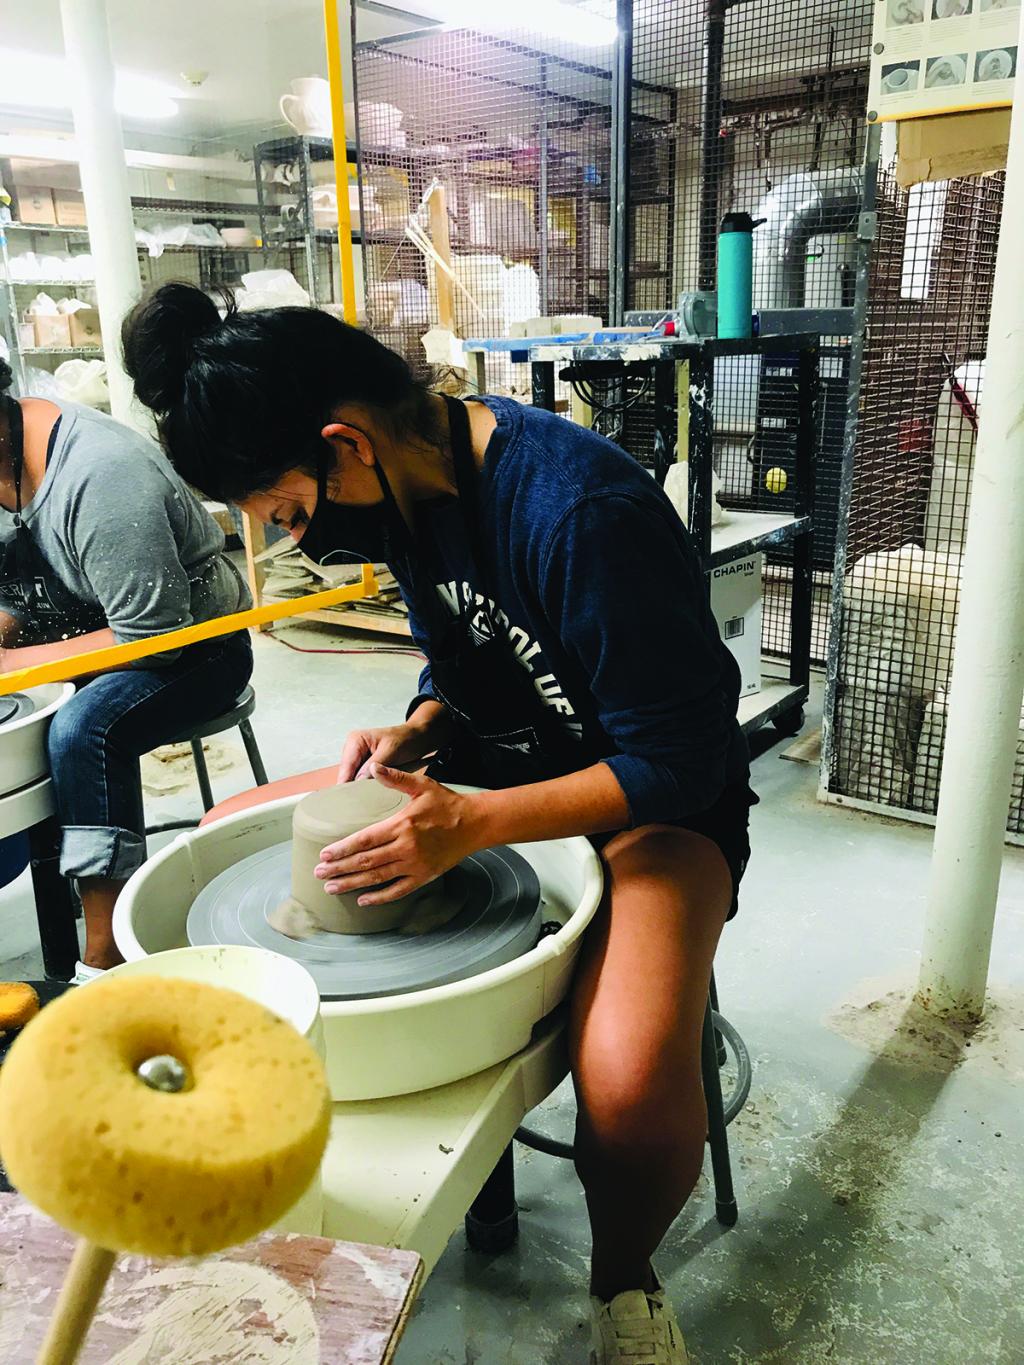 A teen is working on a pottery wheel.